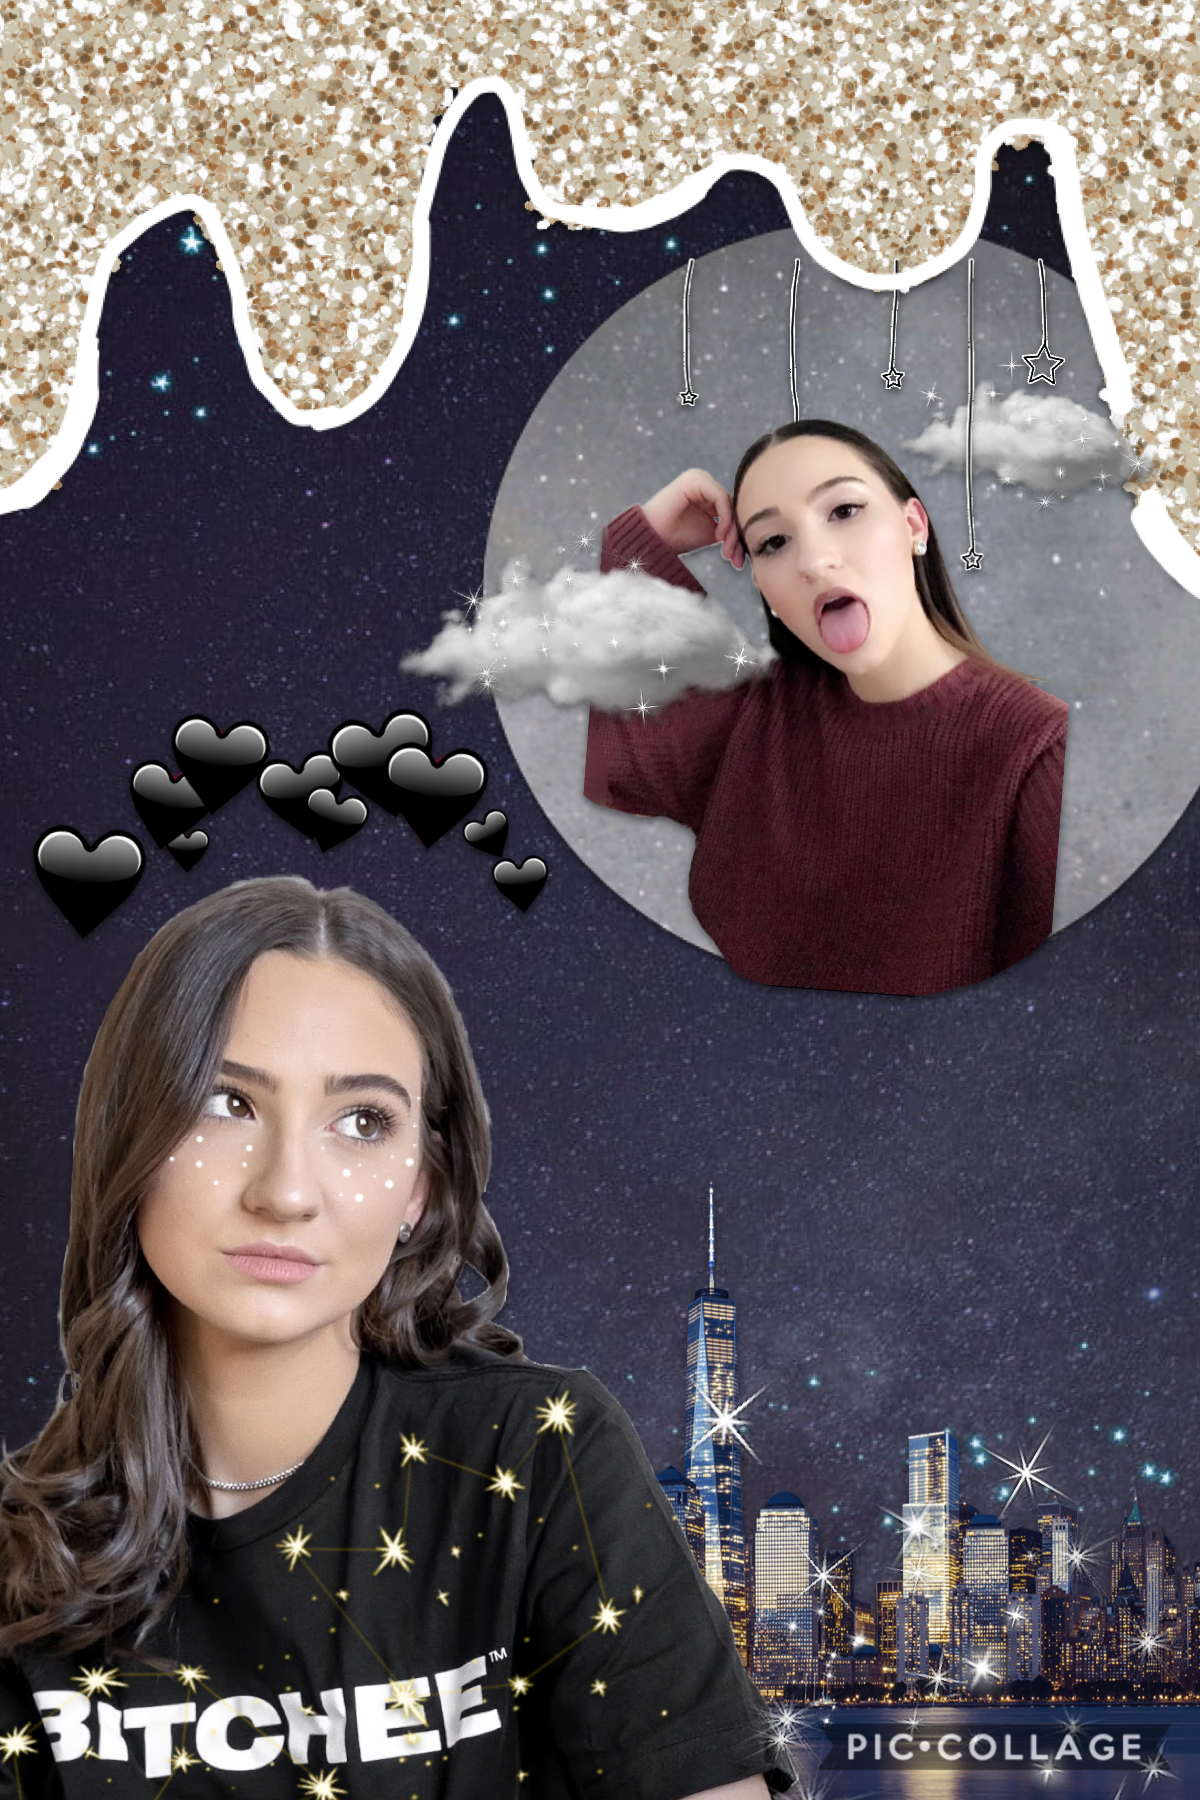 All hail miss beautychickee😂 I love Christina and this was rlly fun to make🤍🖤